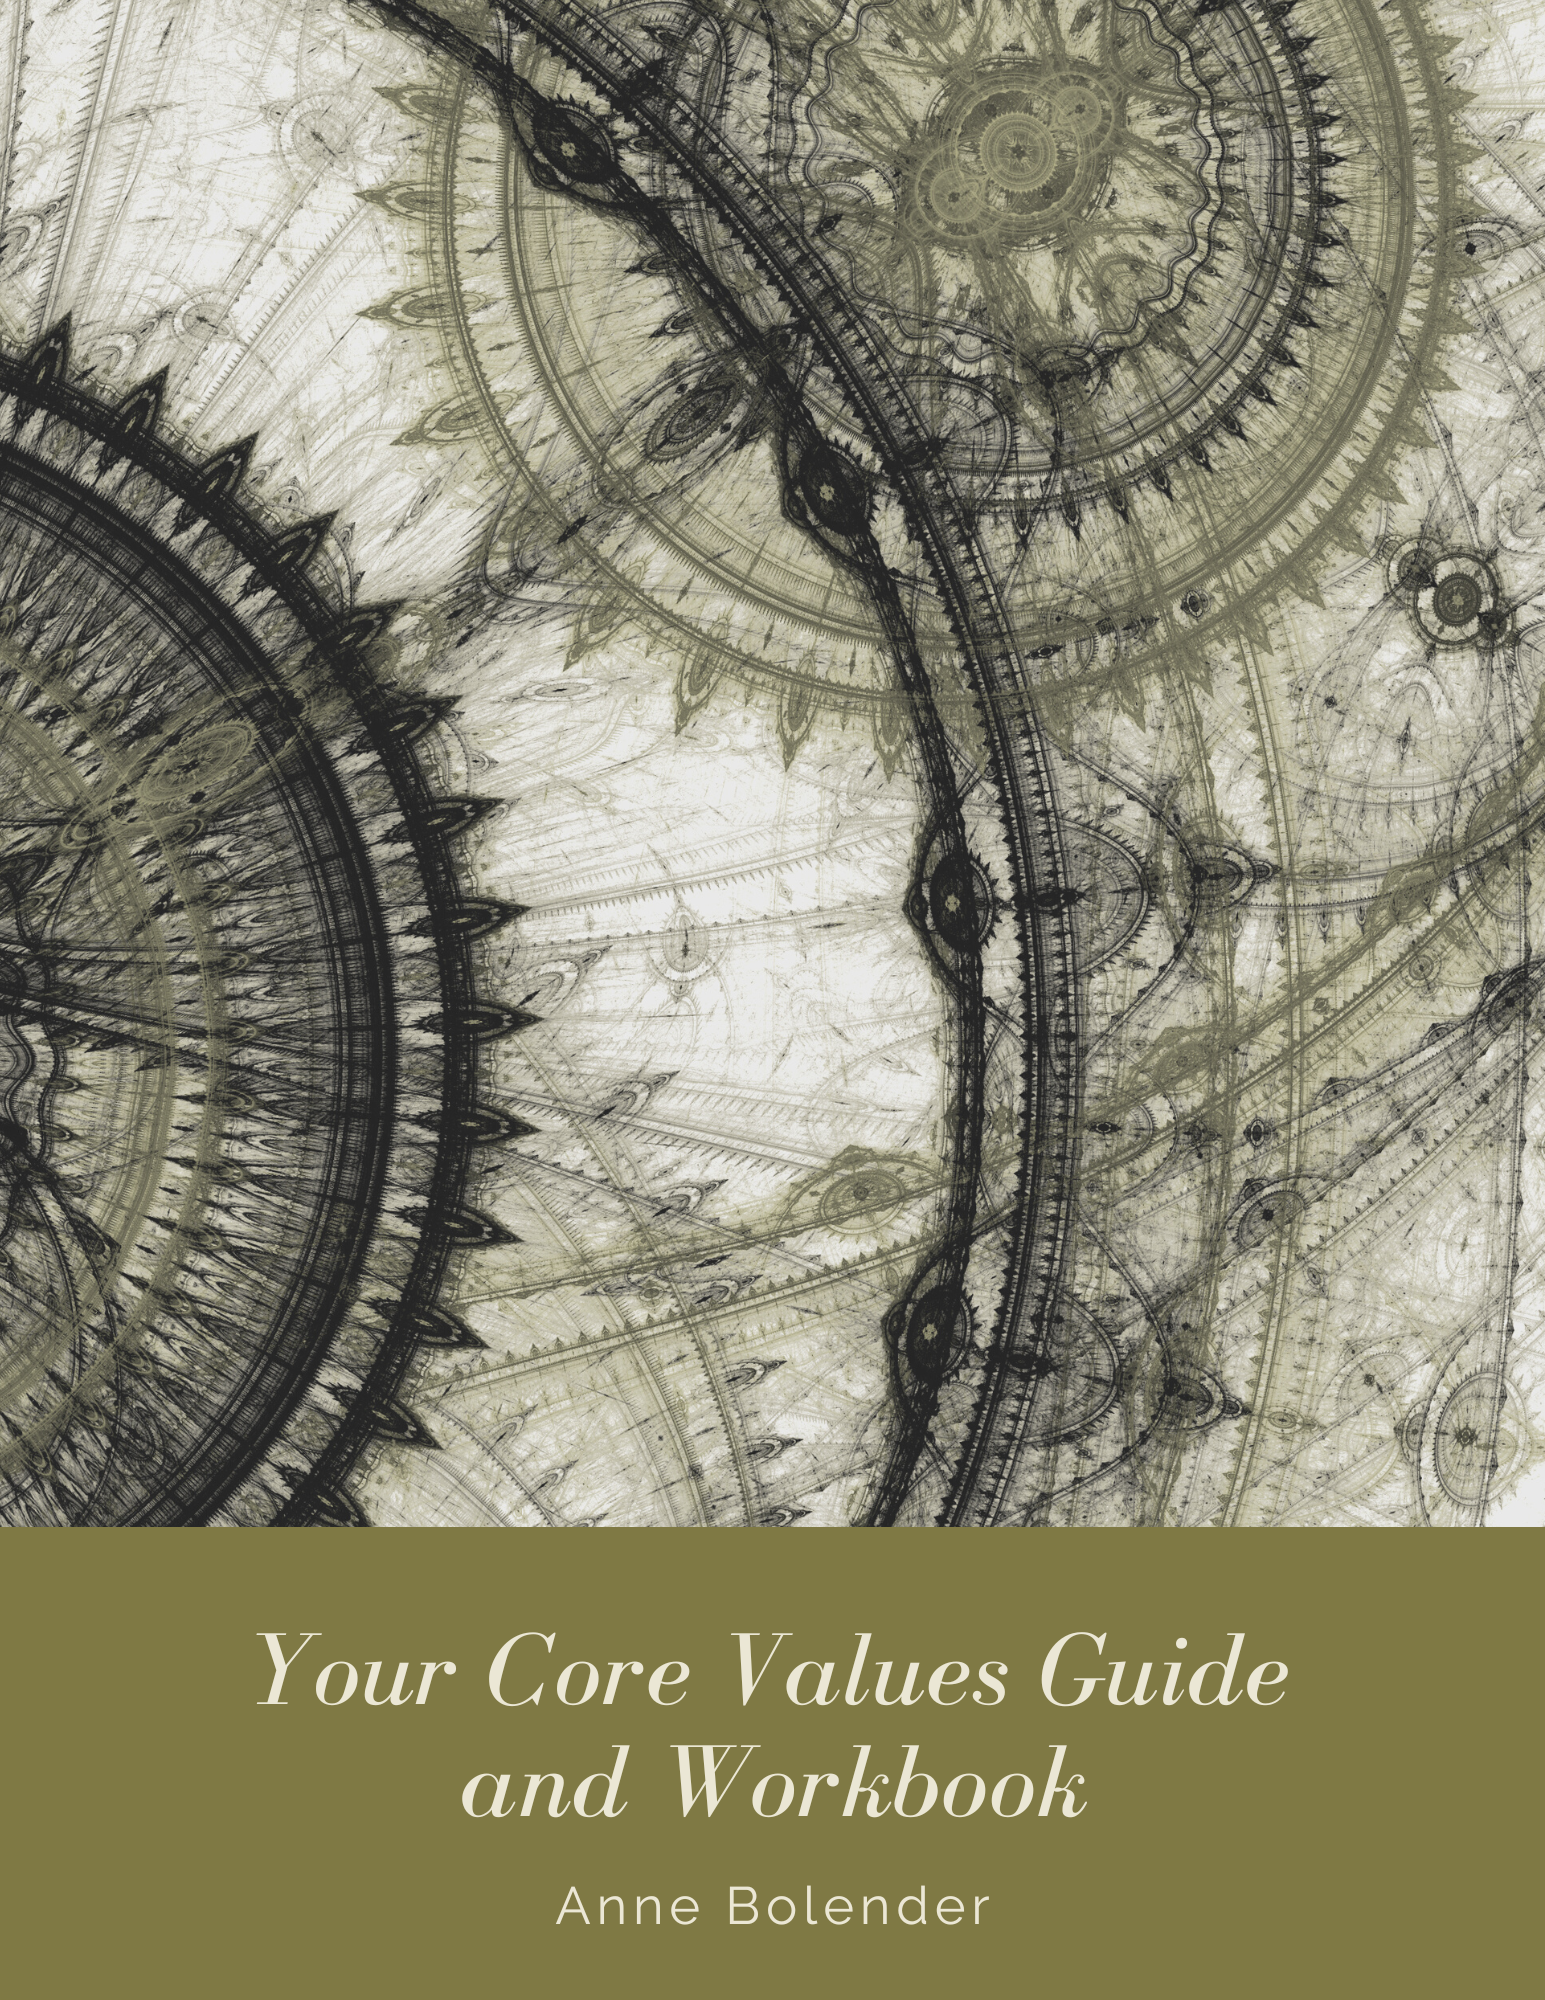 personal core values cover im- green and cream abstract image